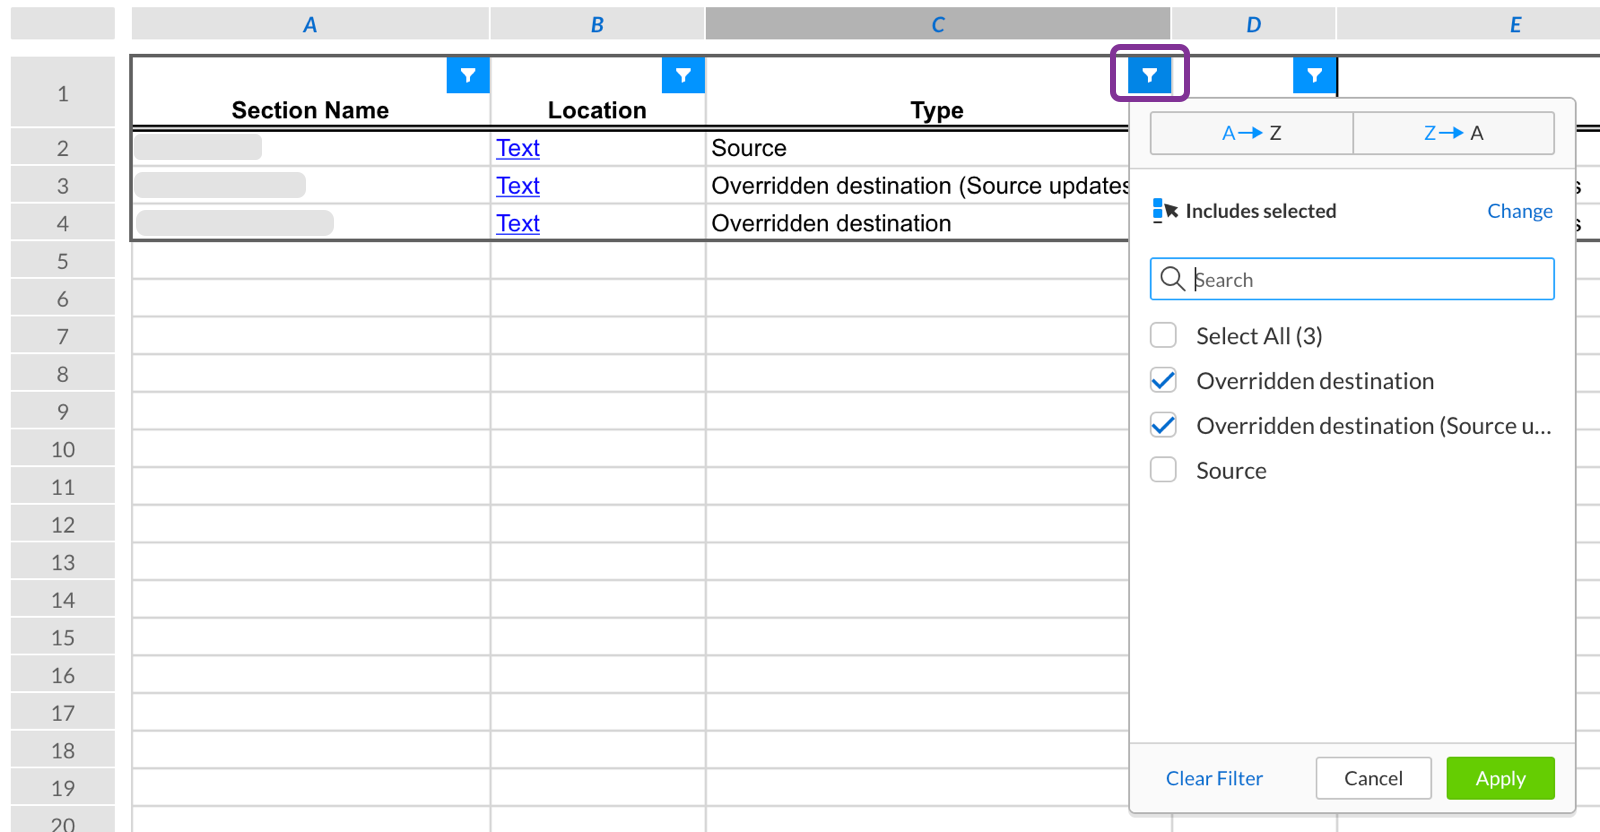 filter the Type column to show only overrides